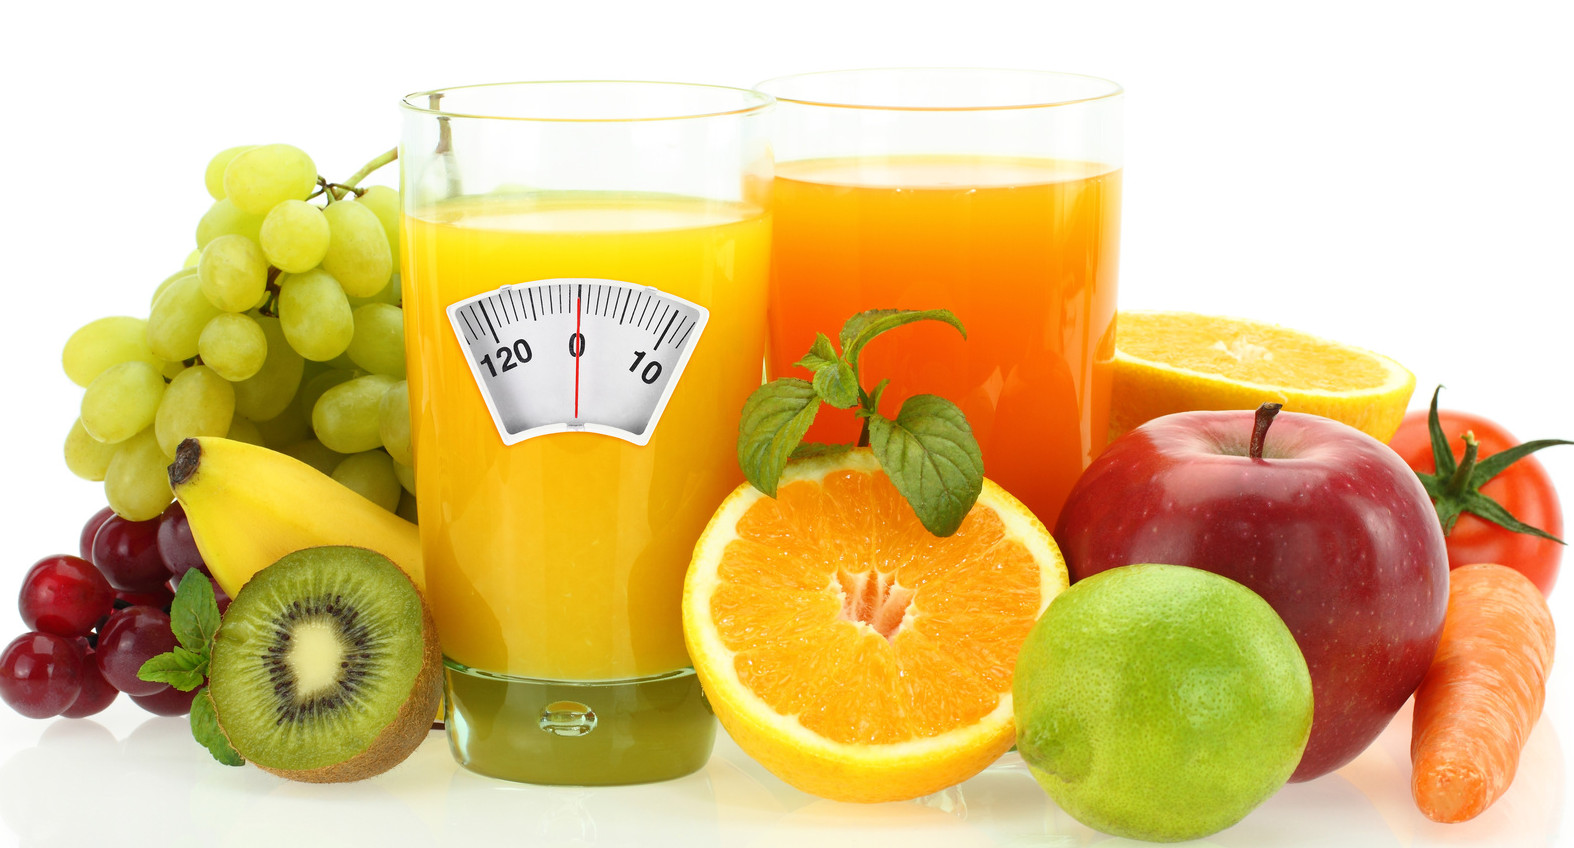 Diet and healthy eating. Fruits, vegetables and juice on white